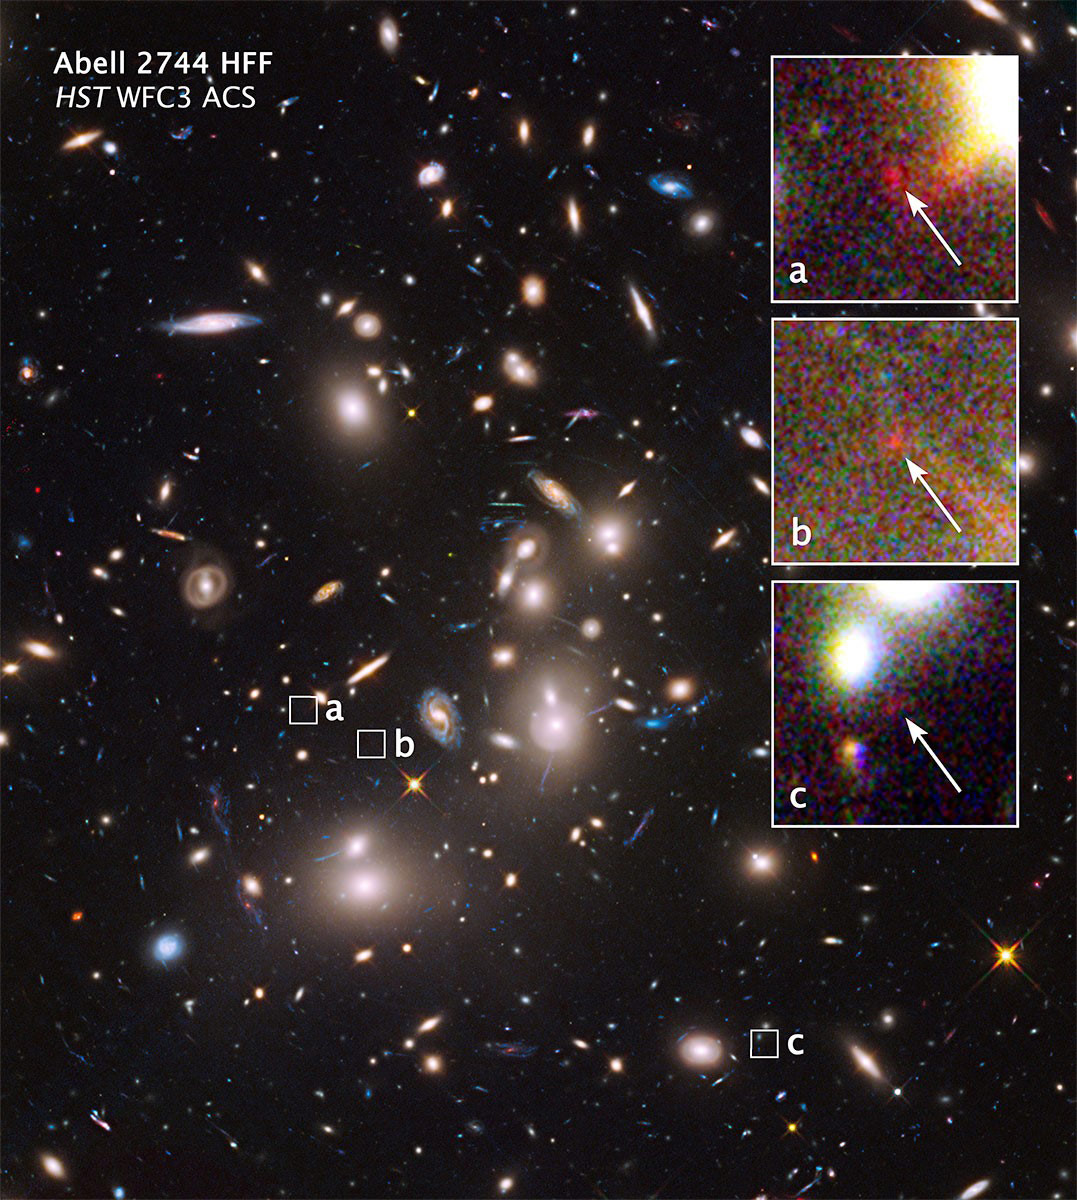 Hubble Finds Small Galaxy More Than 13 Billion Light-Years Away